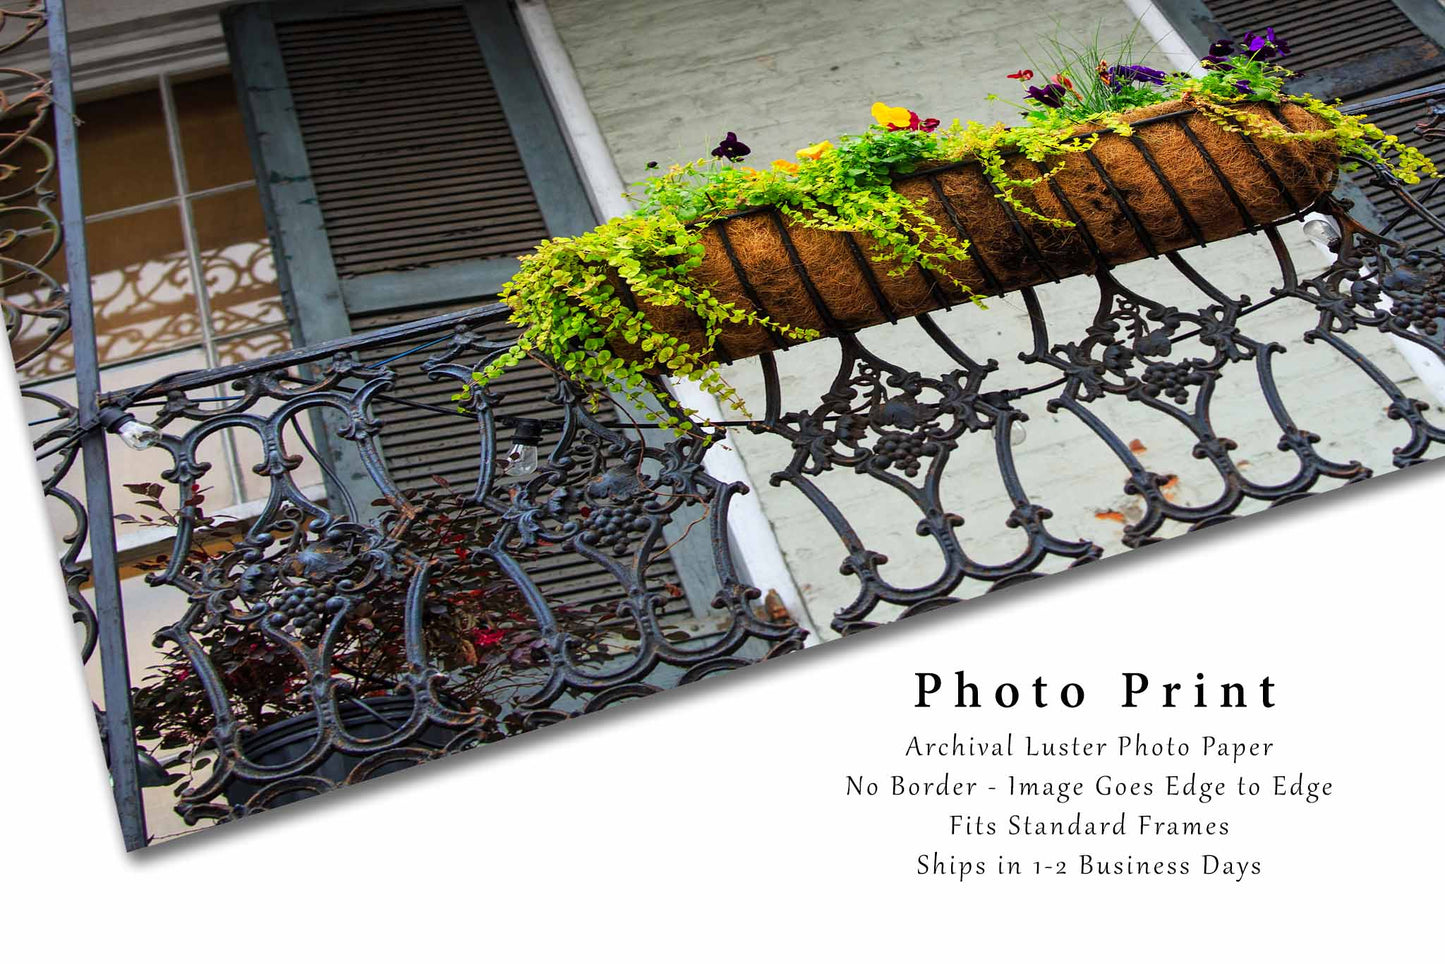 NOLA Photography Print (Not Framed) Picture of Pansies in Planter on Balcony in New Orleans Louisiana Flower Wall Art French Quarter Decor